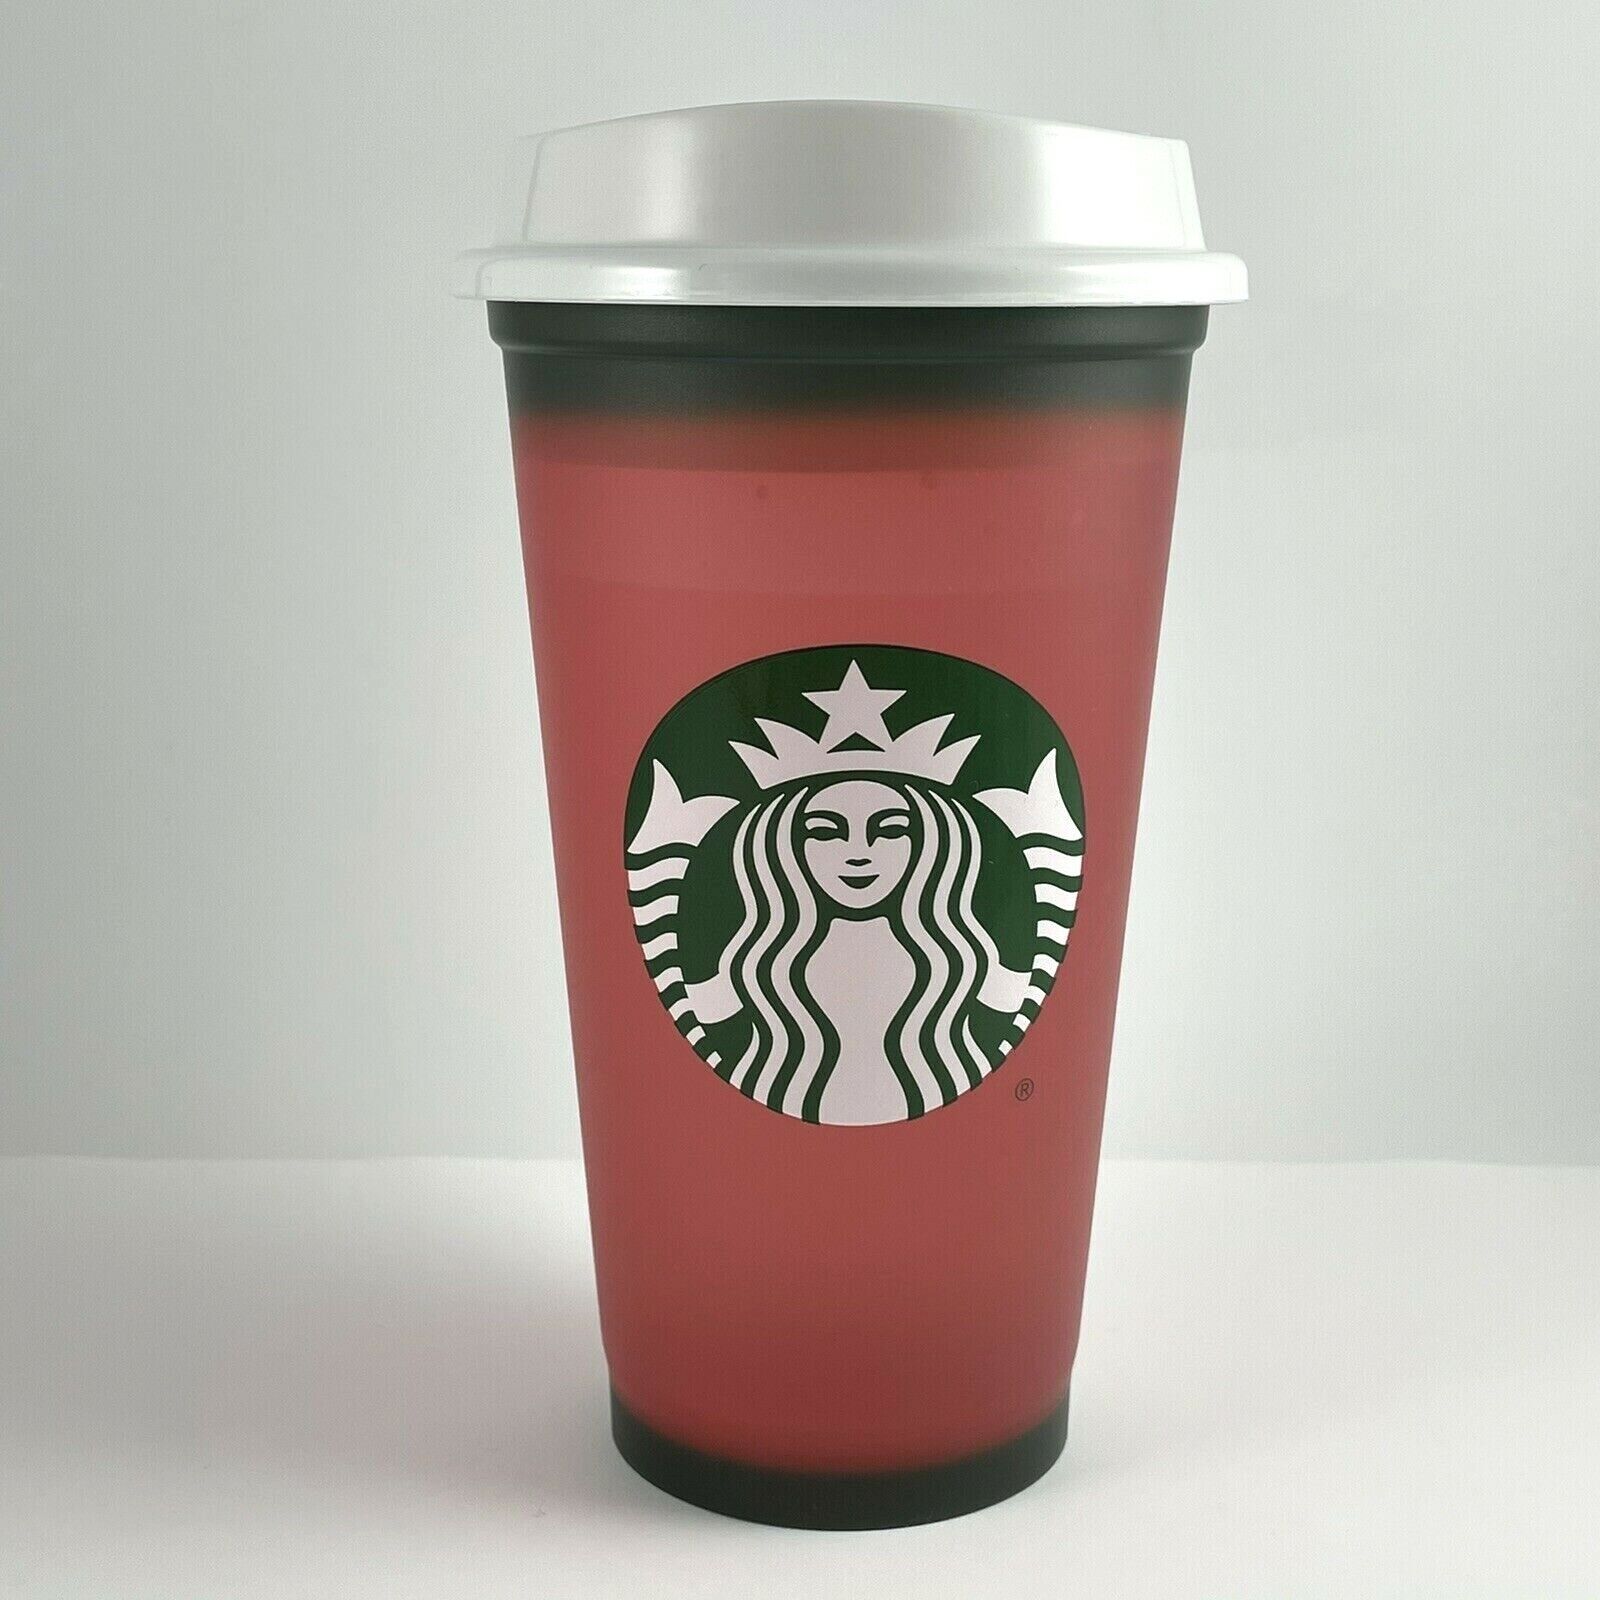 2 Starbucks 2020 Color Changing Reusable Cups Green To Red Holiday Xmas Hot  Starbucks - фотография #4